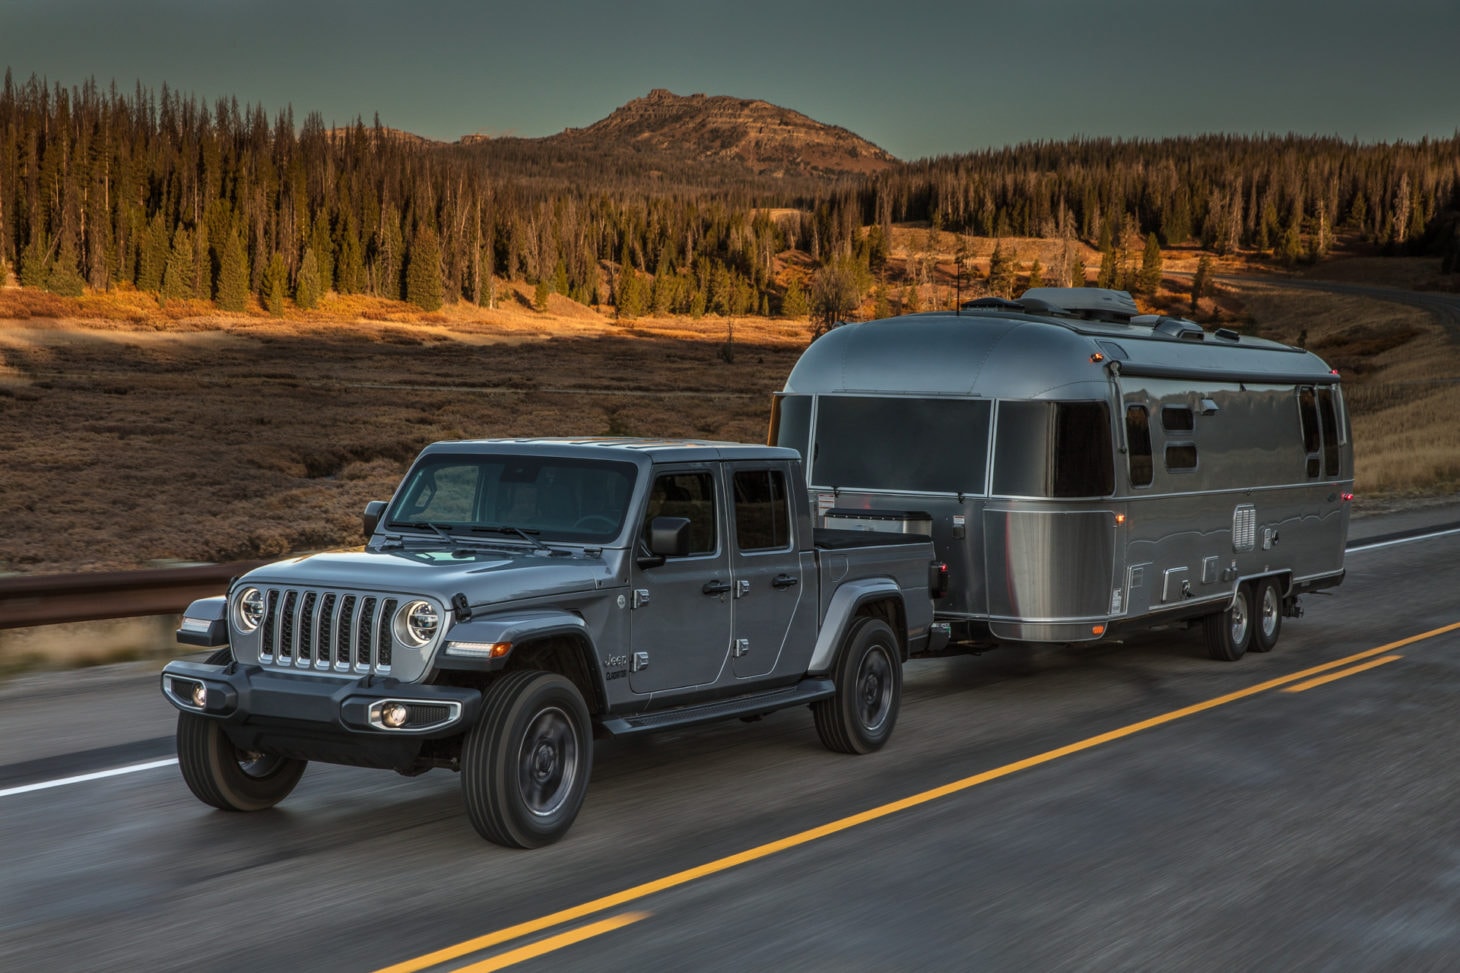 Jeep pickup truck towing Airstream